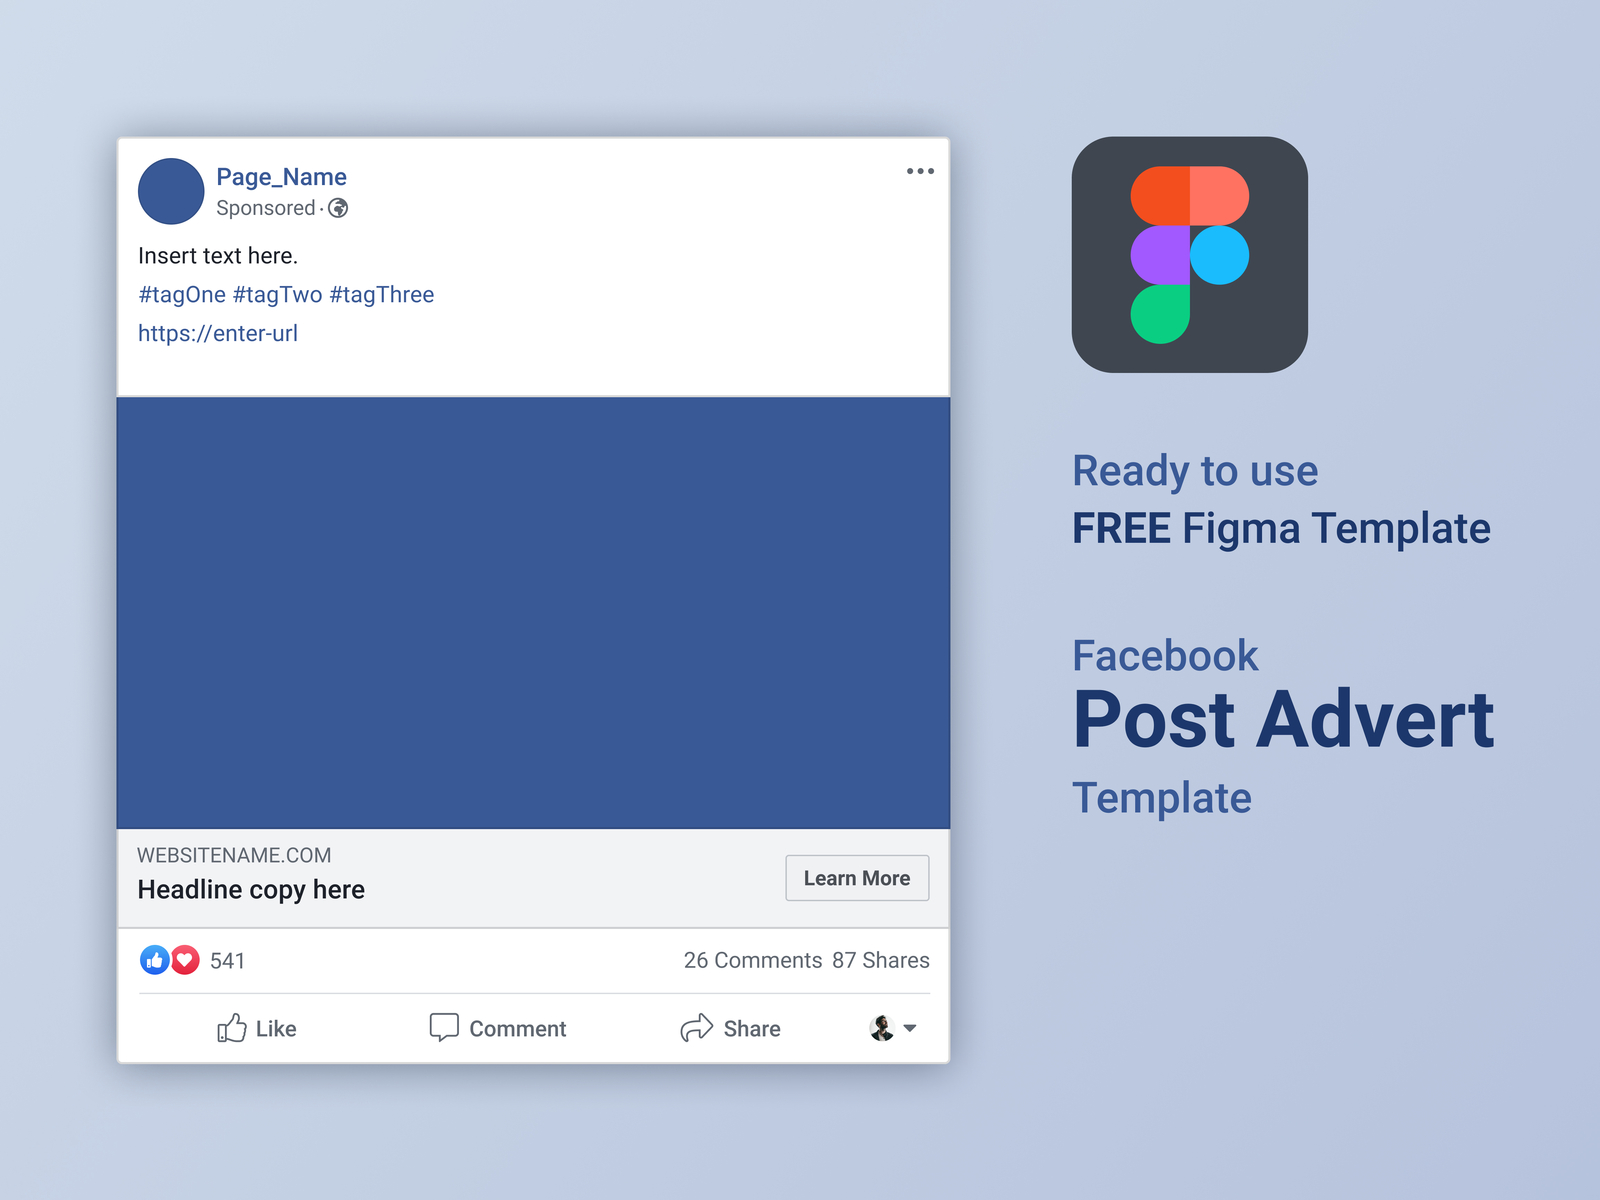 FREE Figma Facebook Advert Post Template by Ernest Gerber on Dribbble